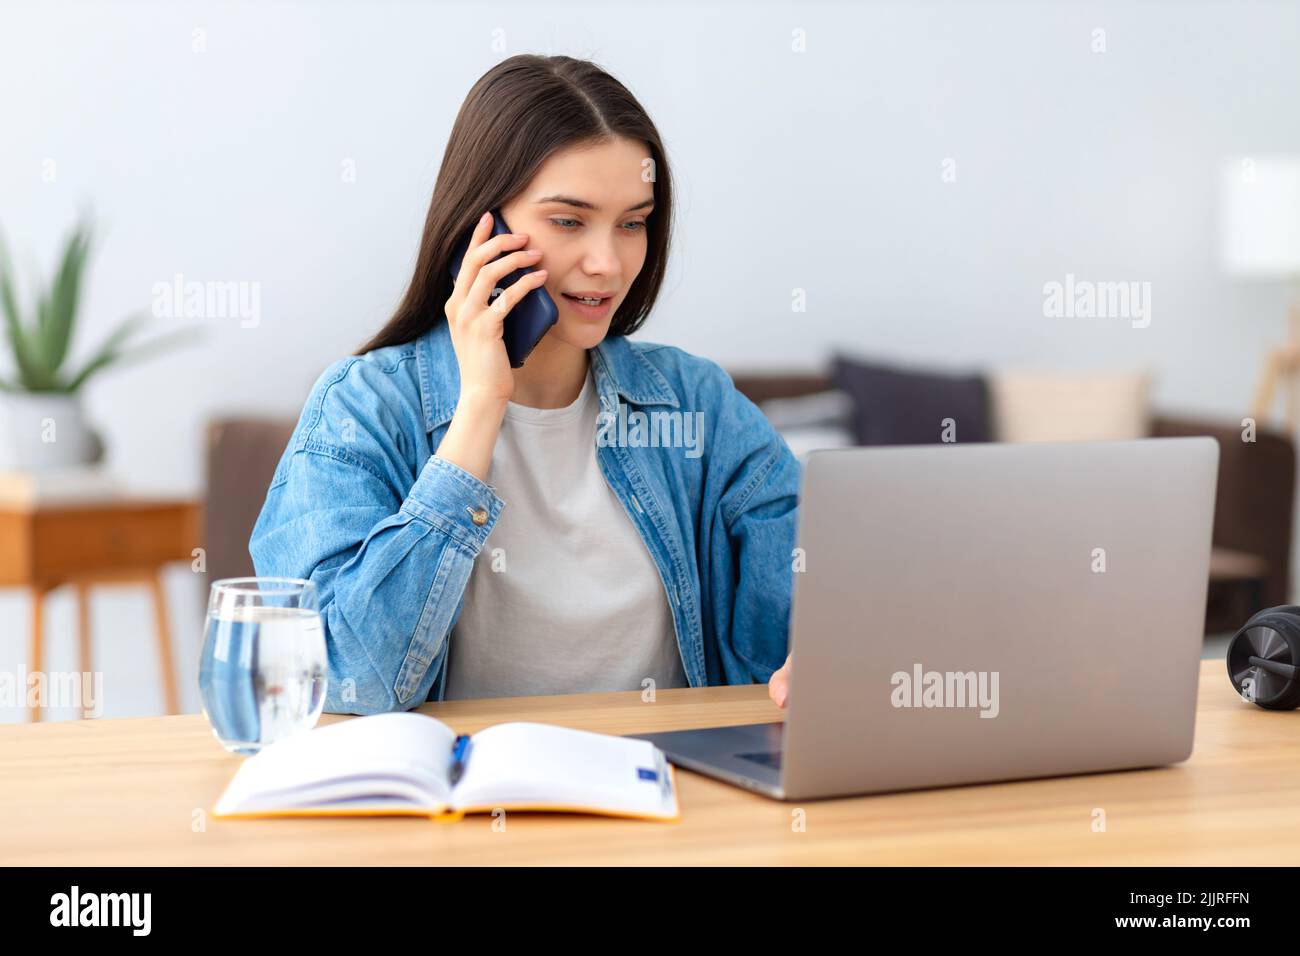 woman freelancer or office employee working remotely using laptop Stock Photo